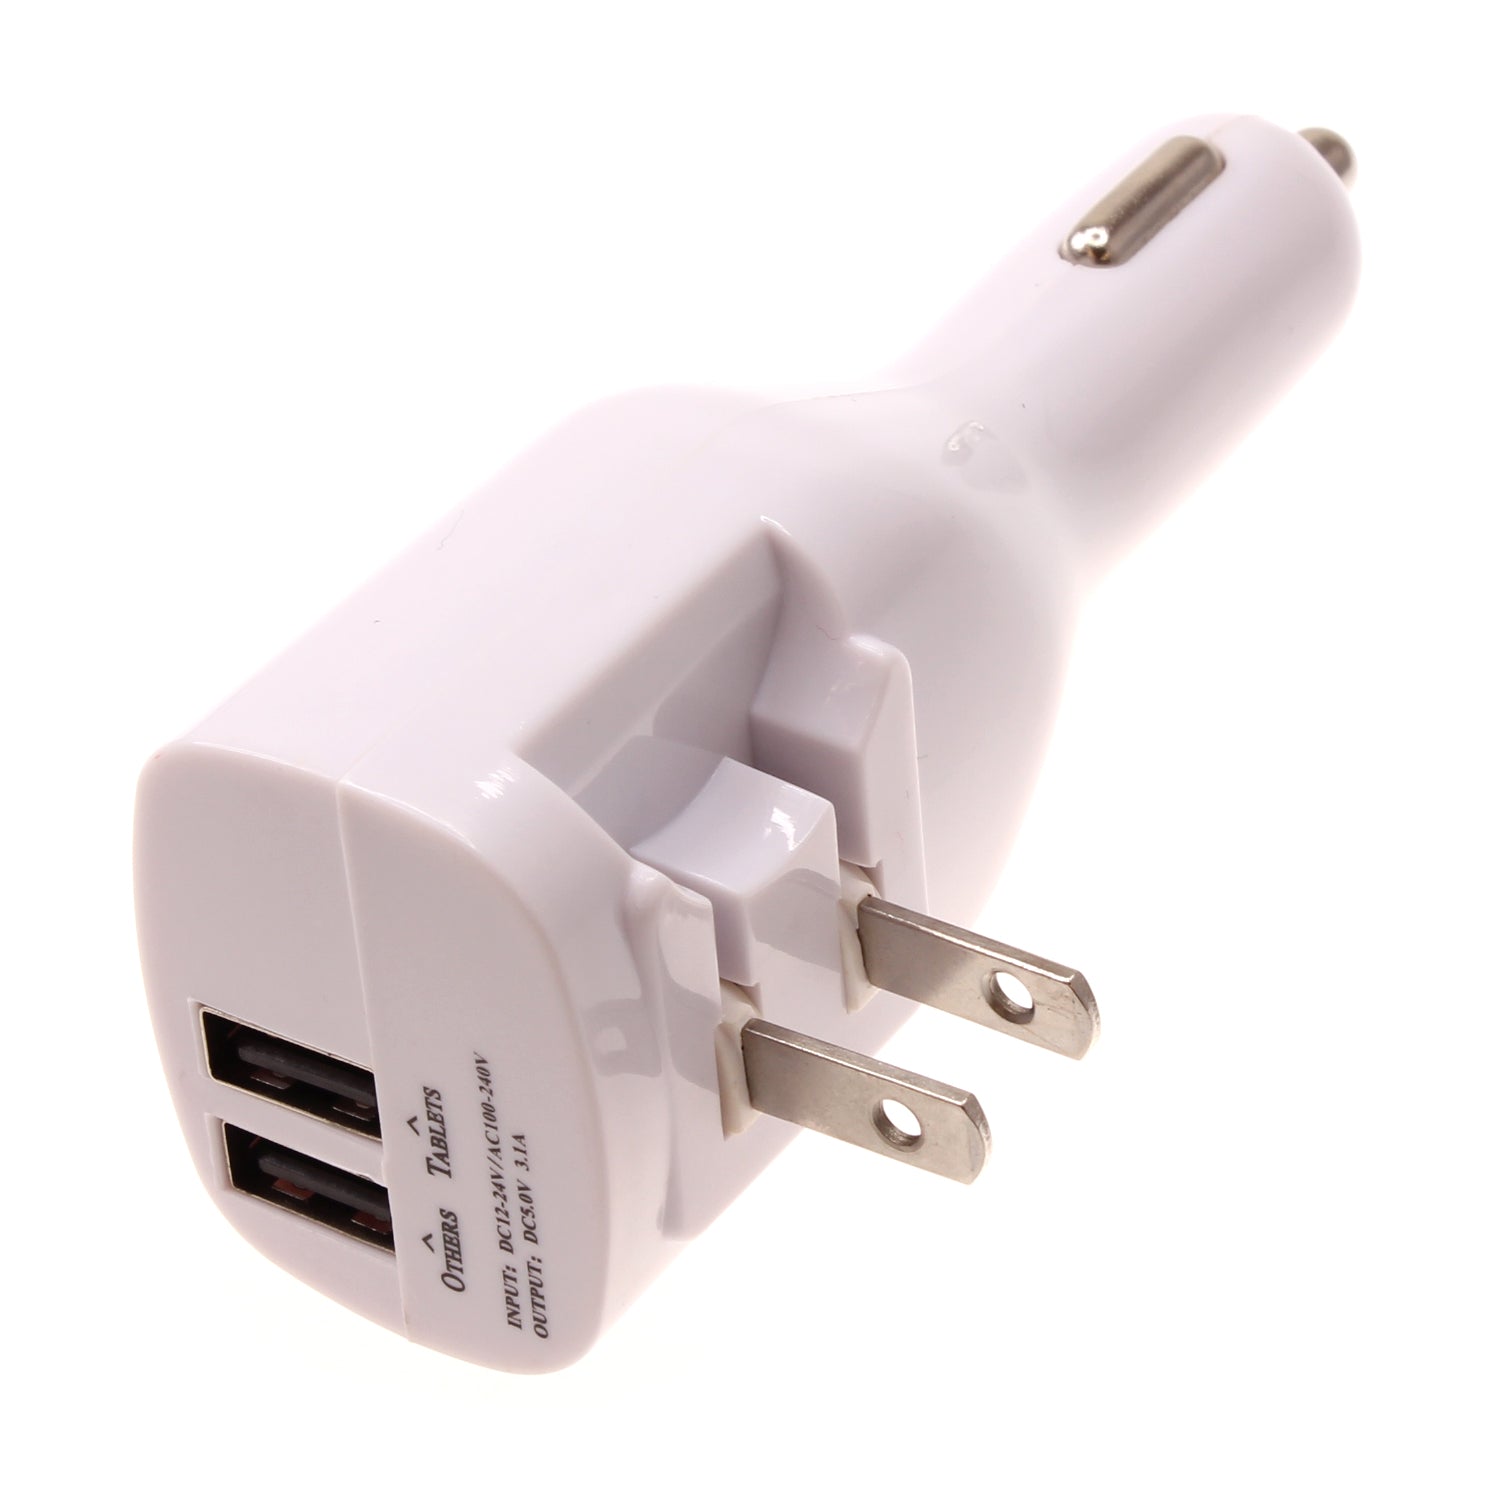 2-in-1 Car Home Charger, Folding Prongs Charging Wire Travel Adapter Power Cord 6ft Long USB Cable - NWY13